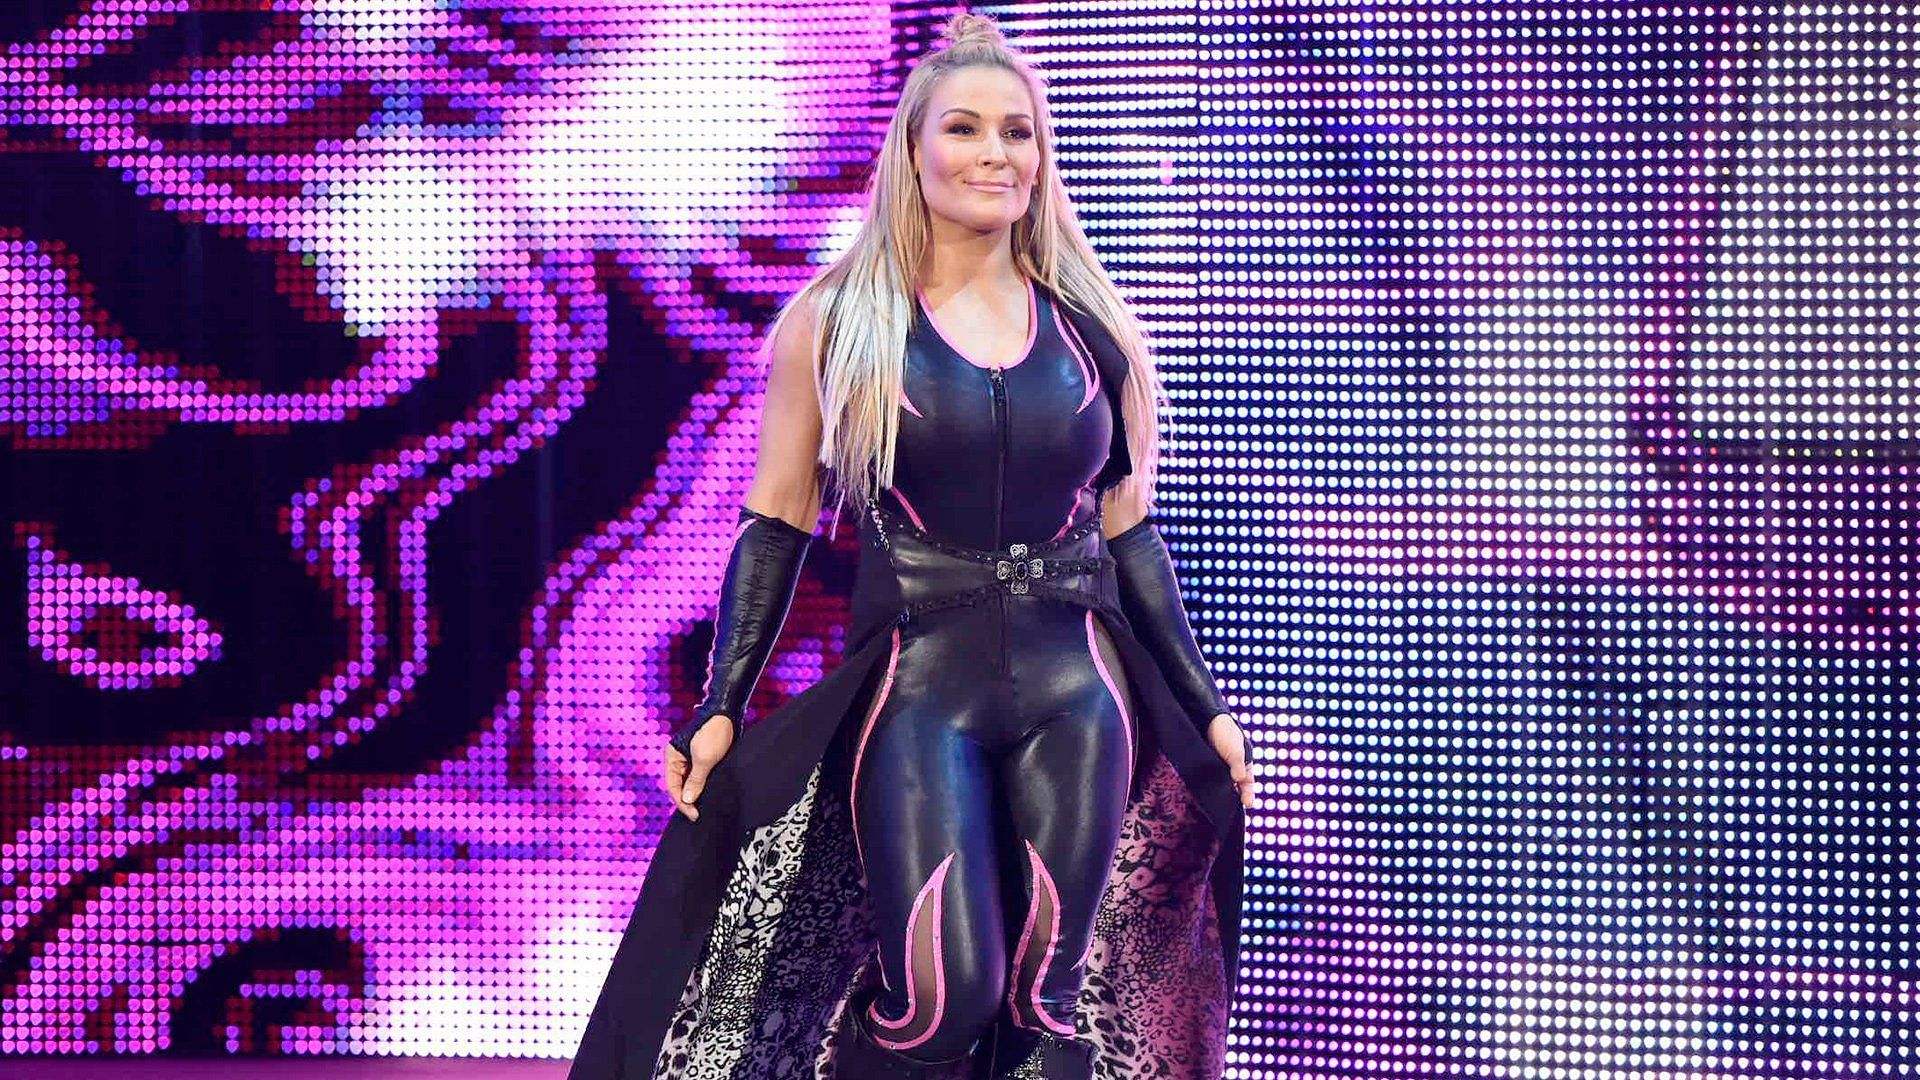 Natalya heads to the ring on WWE RAW